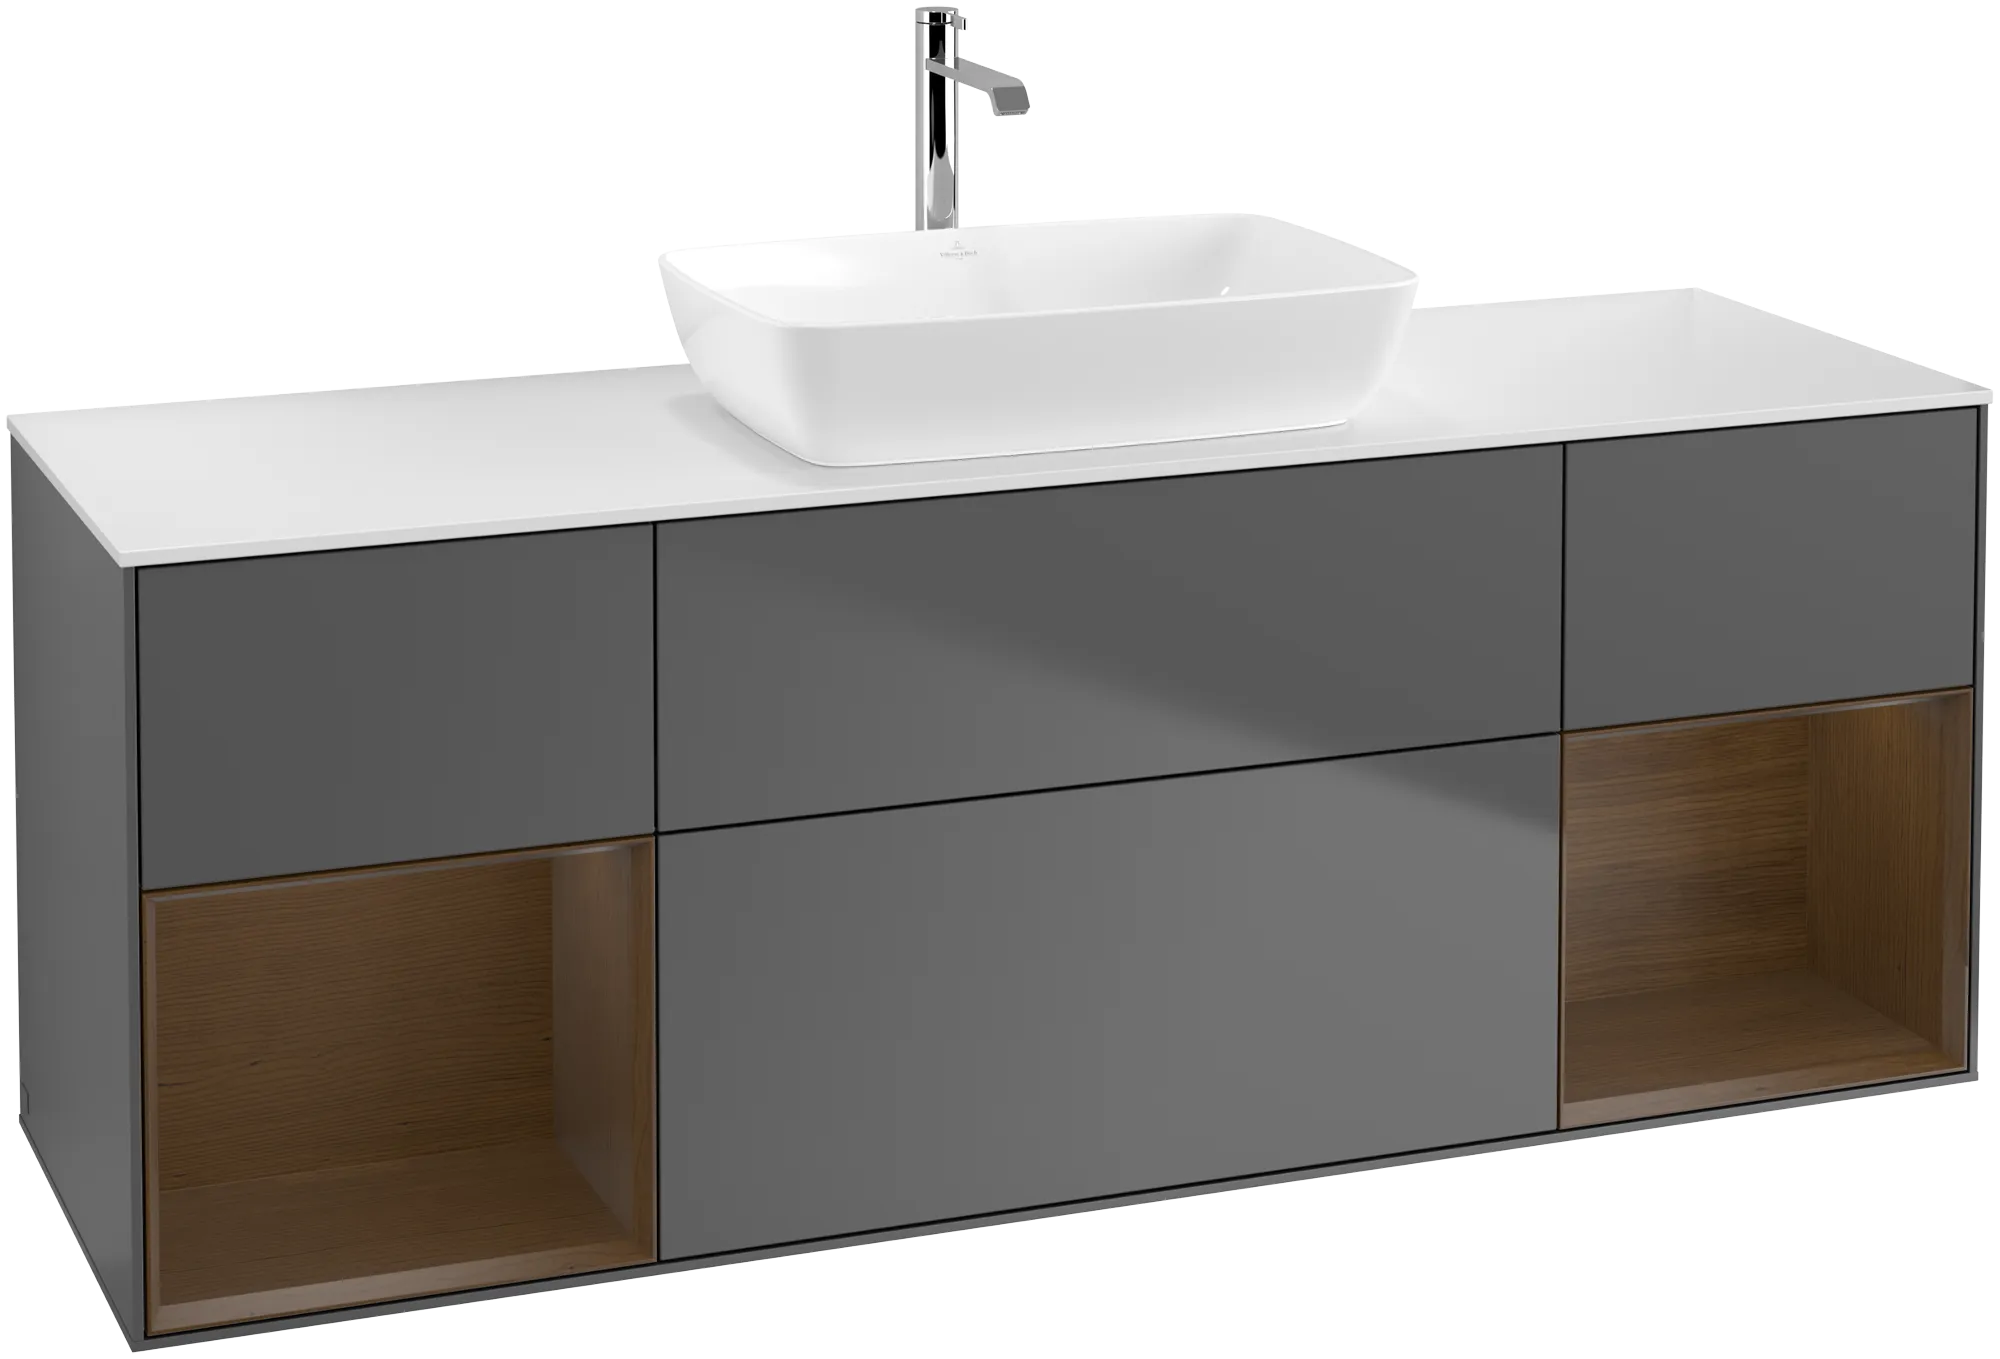 Picture of VILLEROY BOCH Finion Vanity unit, with lighting, 4 pull-out compartments, 1600 x 603 x 501 mm, Anthracite Matt Lacquer / Walnut Veneer / Glass White Matt #G861GNGK